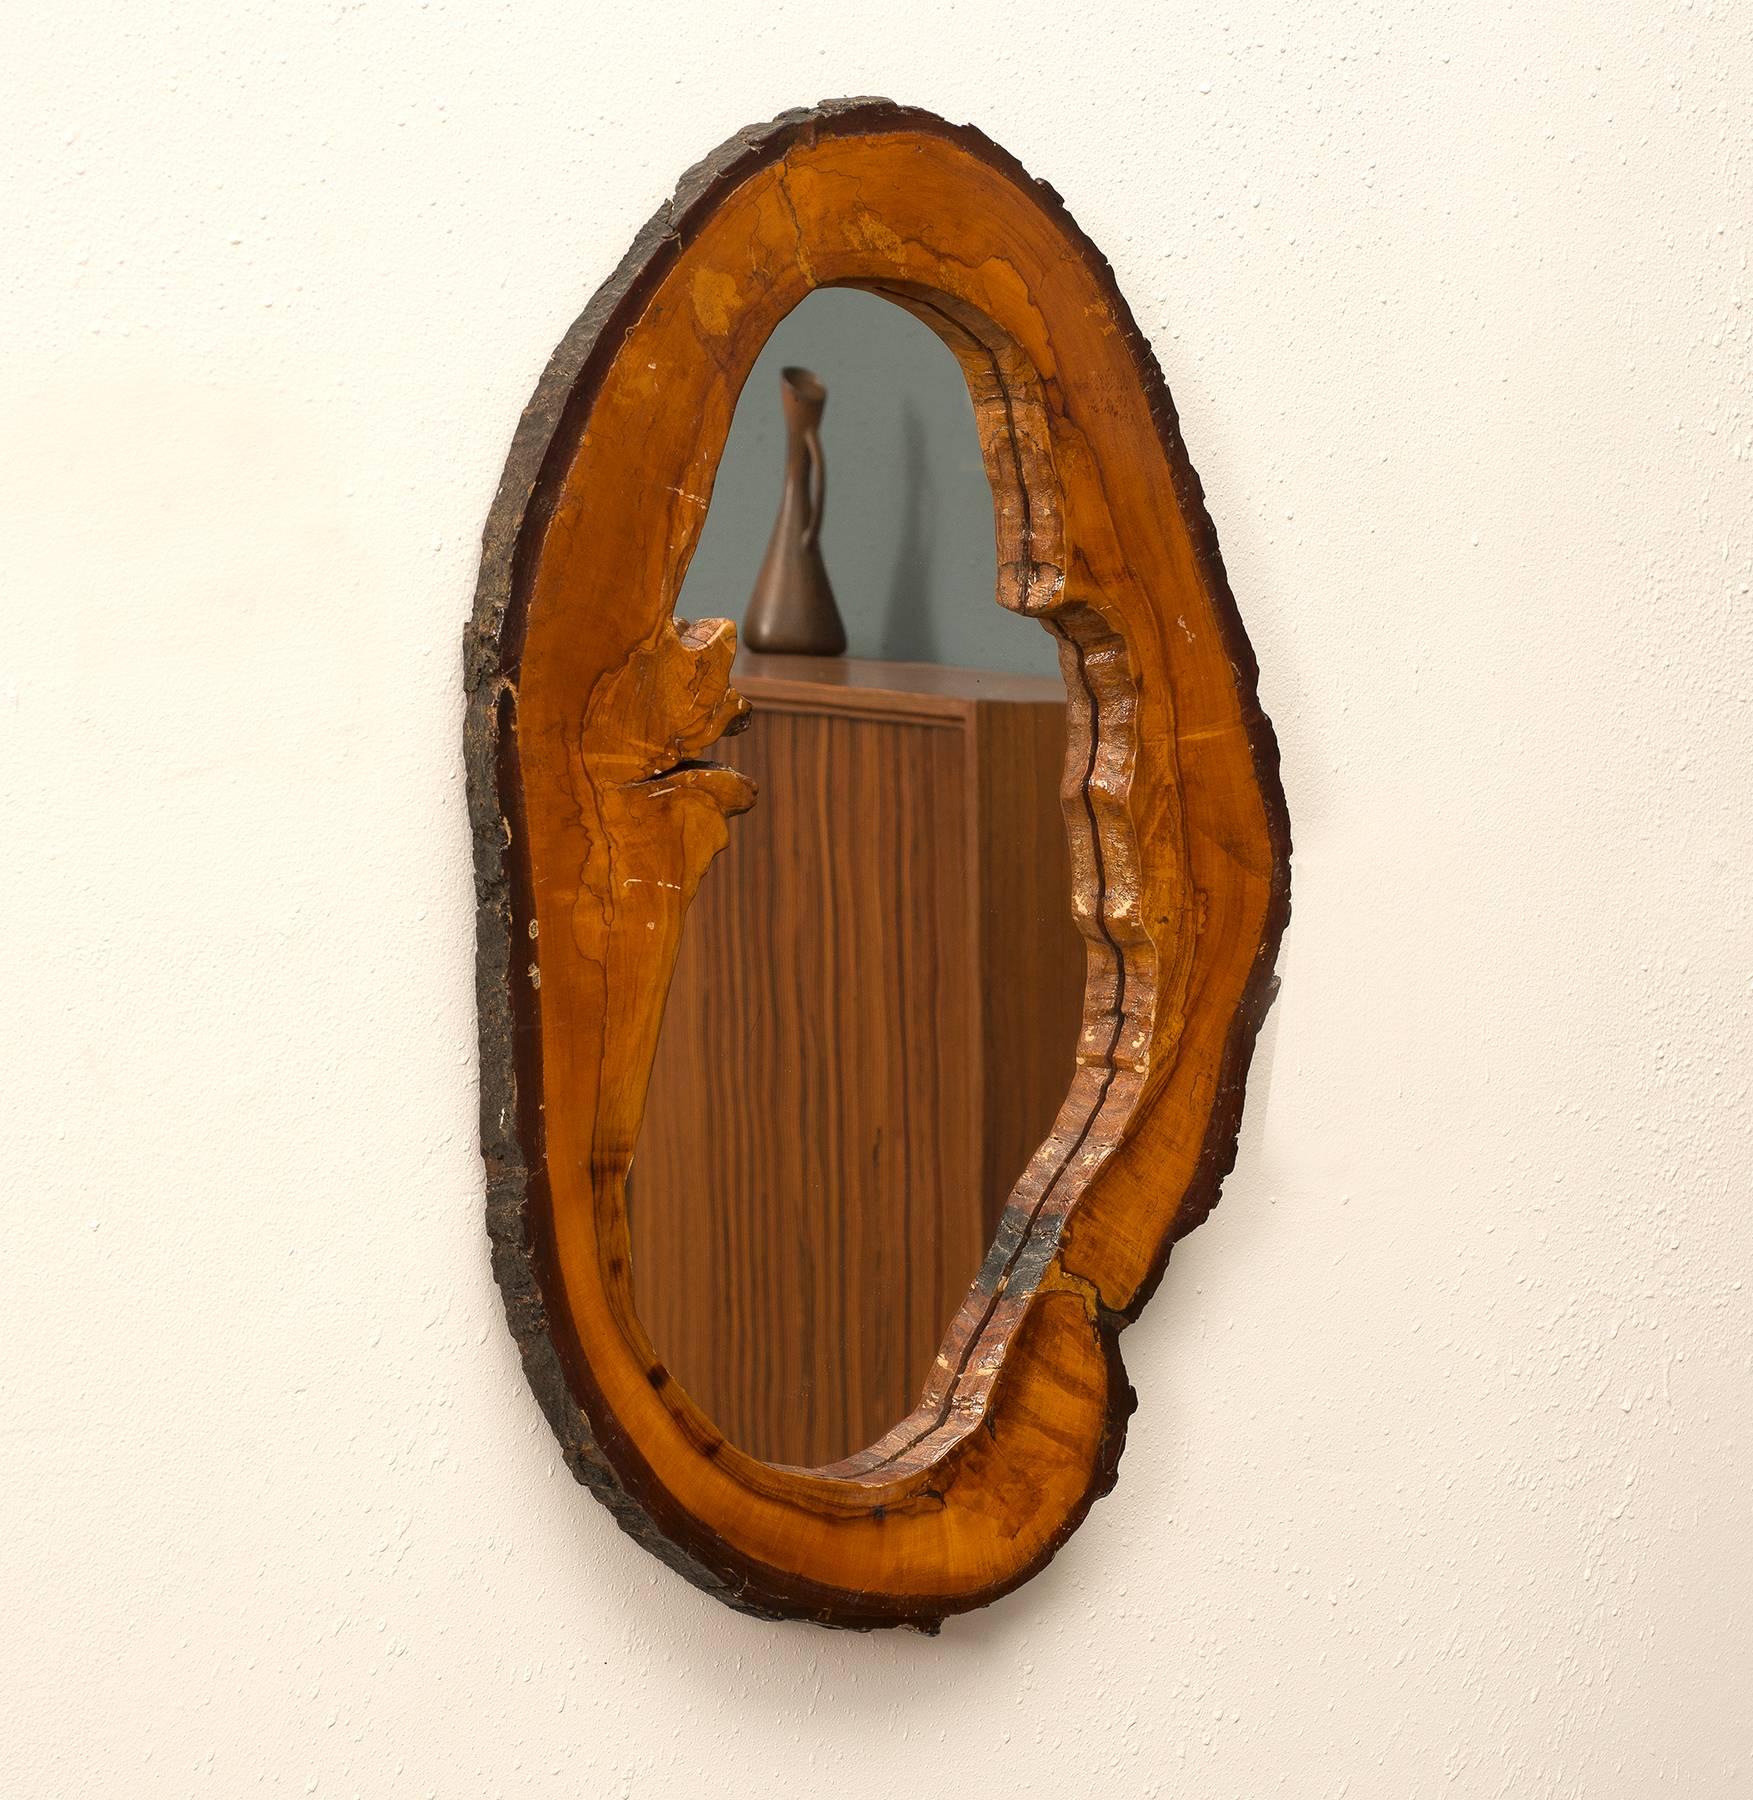 A lovely live edge mirror in walnut, 1950s.